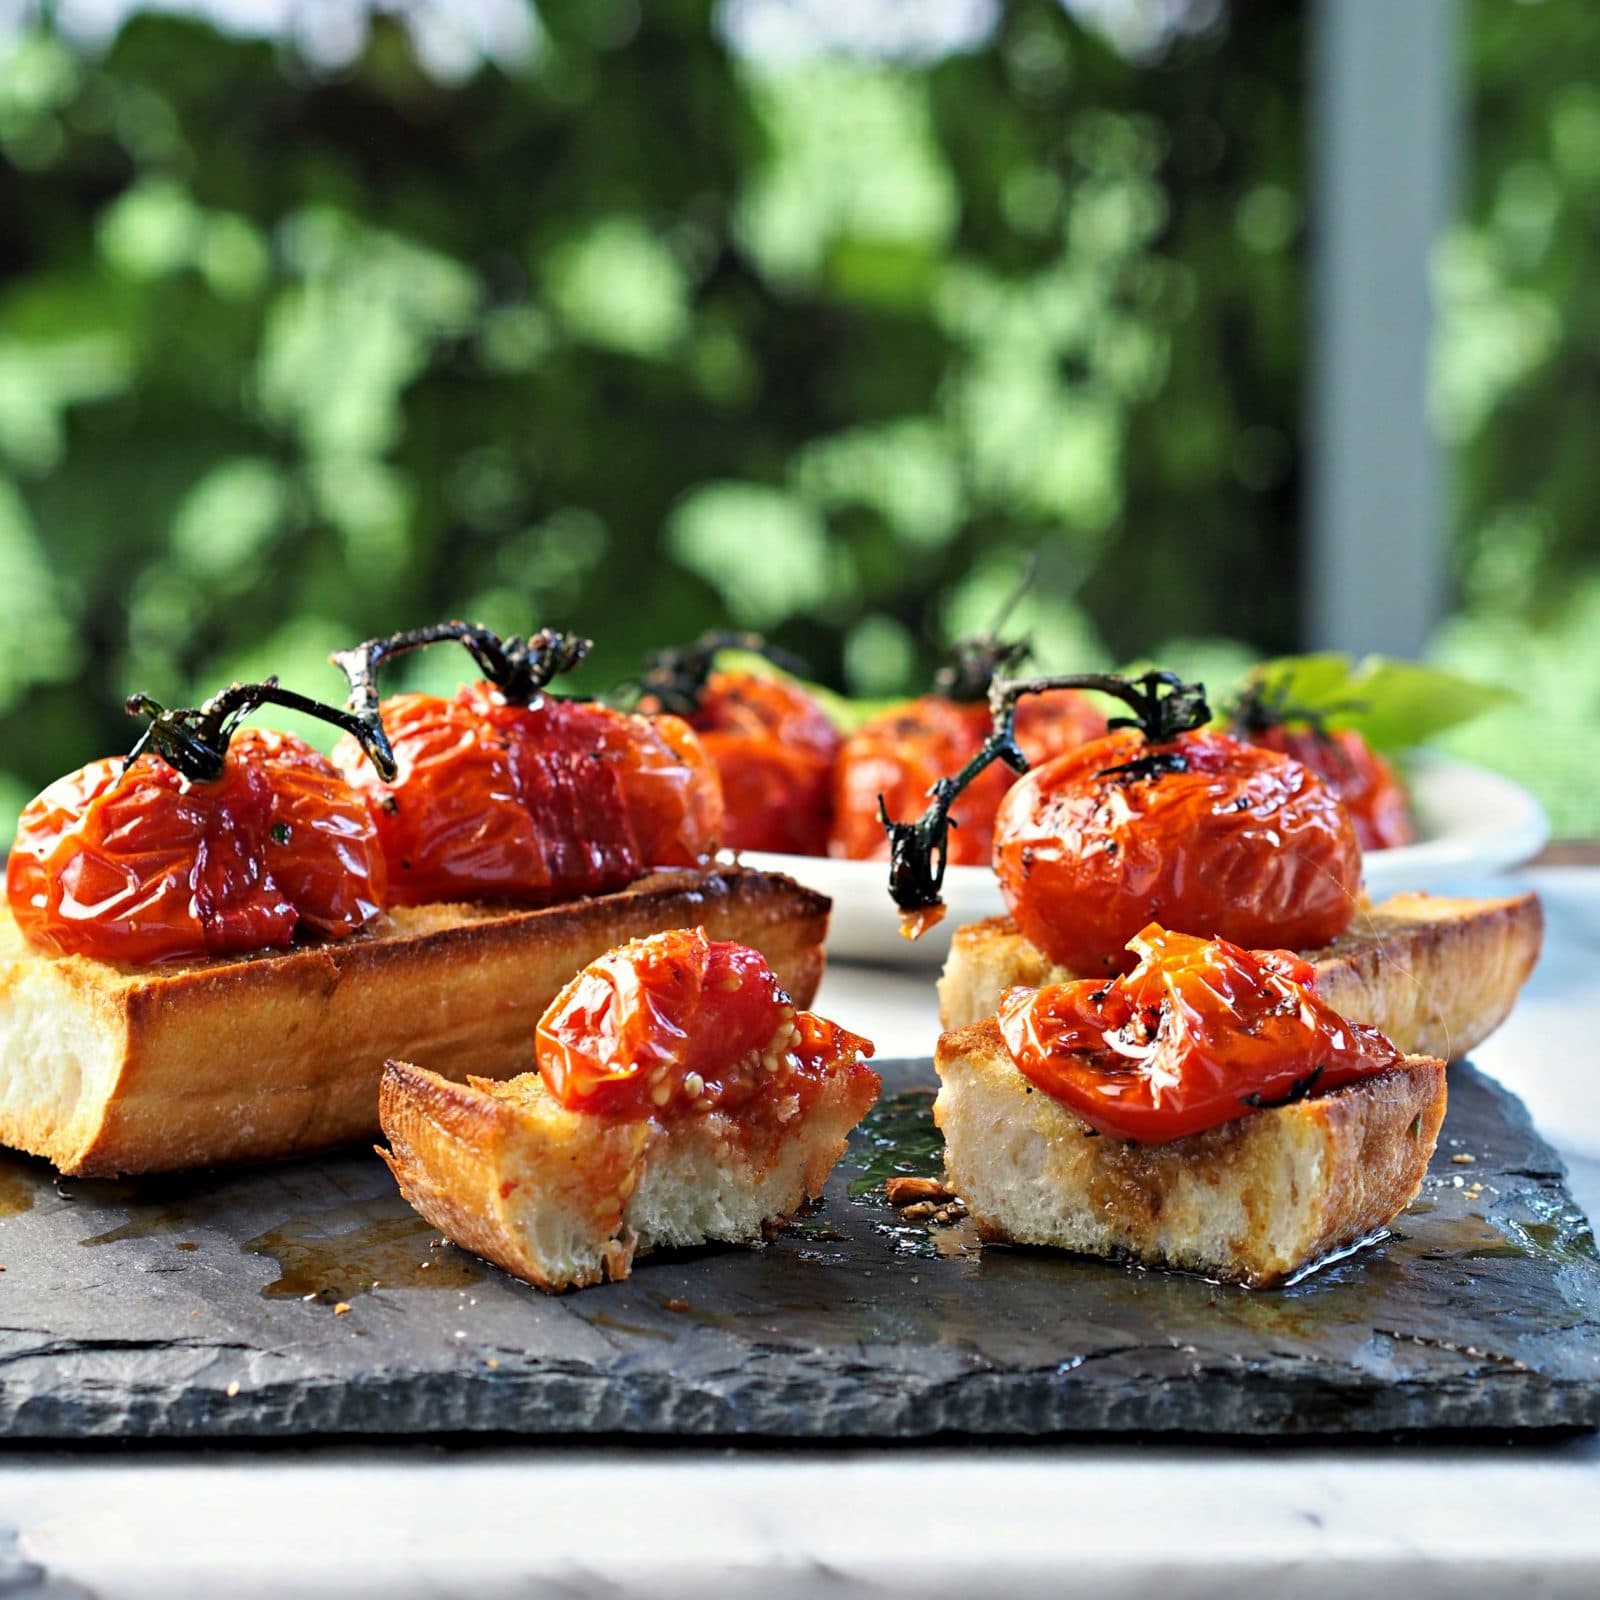 Roasted Tomato Bruschetta. Toasted Italian bread topped w/roasted tomatoes on the vine - the perfect appetizer for your favorite Italian meal. Simply Sated